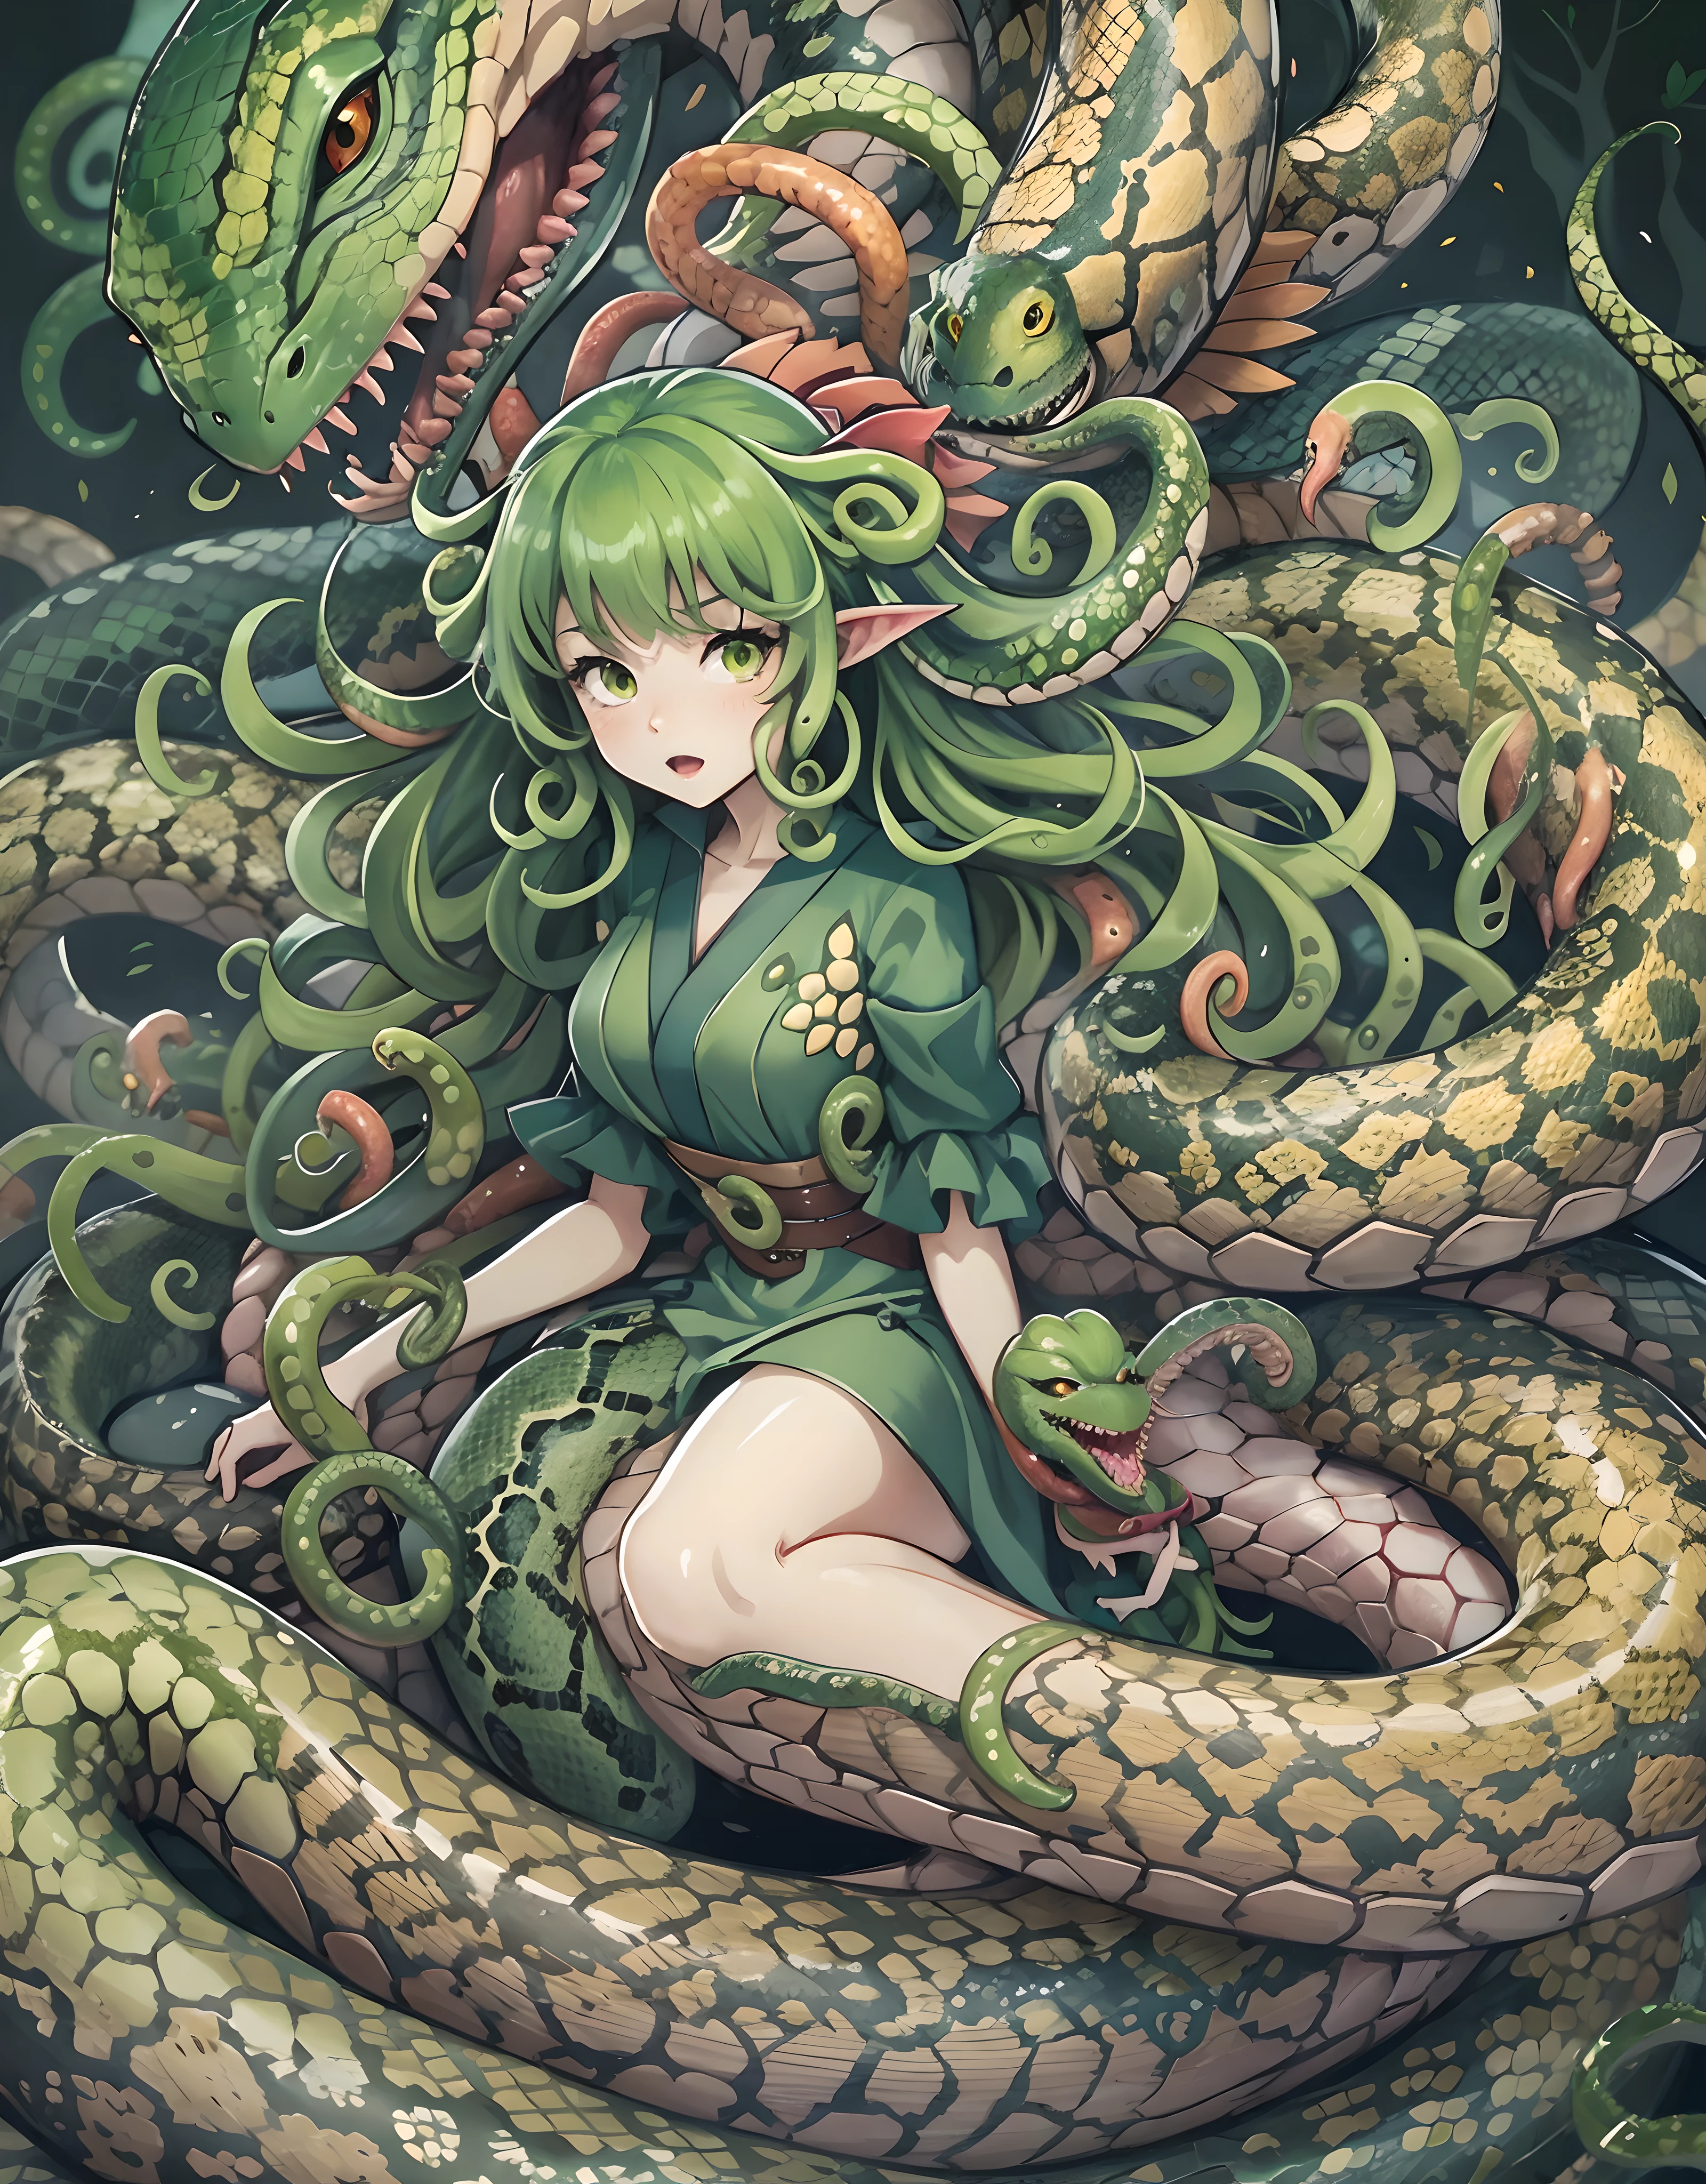 detailed snake skin、Cartoon photo of woman with green dress and green tail、anime monster girl、lamia、Hot reptiles、humanoid woman、tatsumaki with green curly hair、tentacle beasts、Polychaeteonster Girl、Snake Pose、Tentacle monsters、detaile。animesque。tentaculata